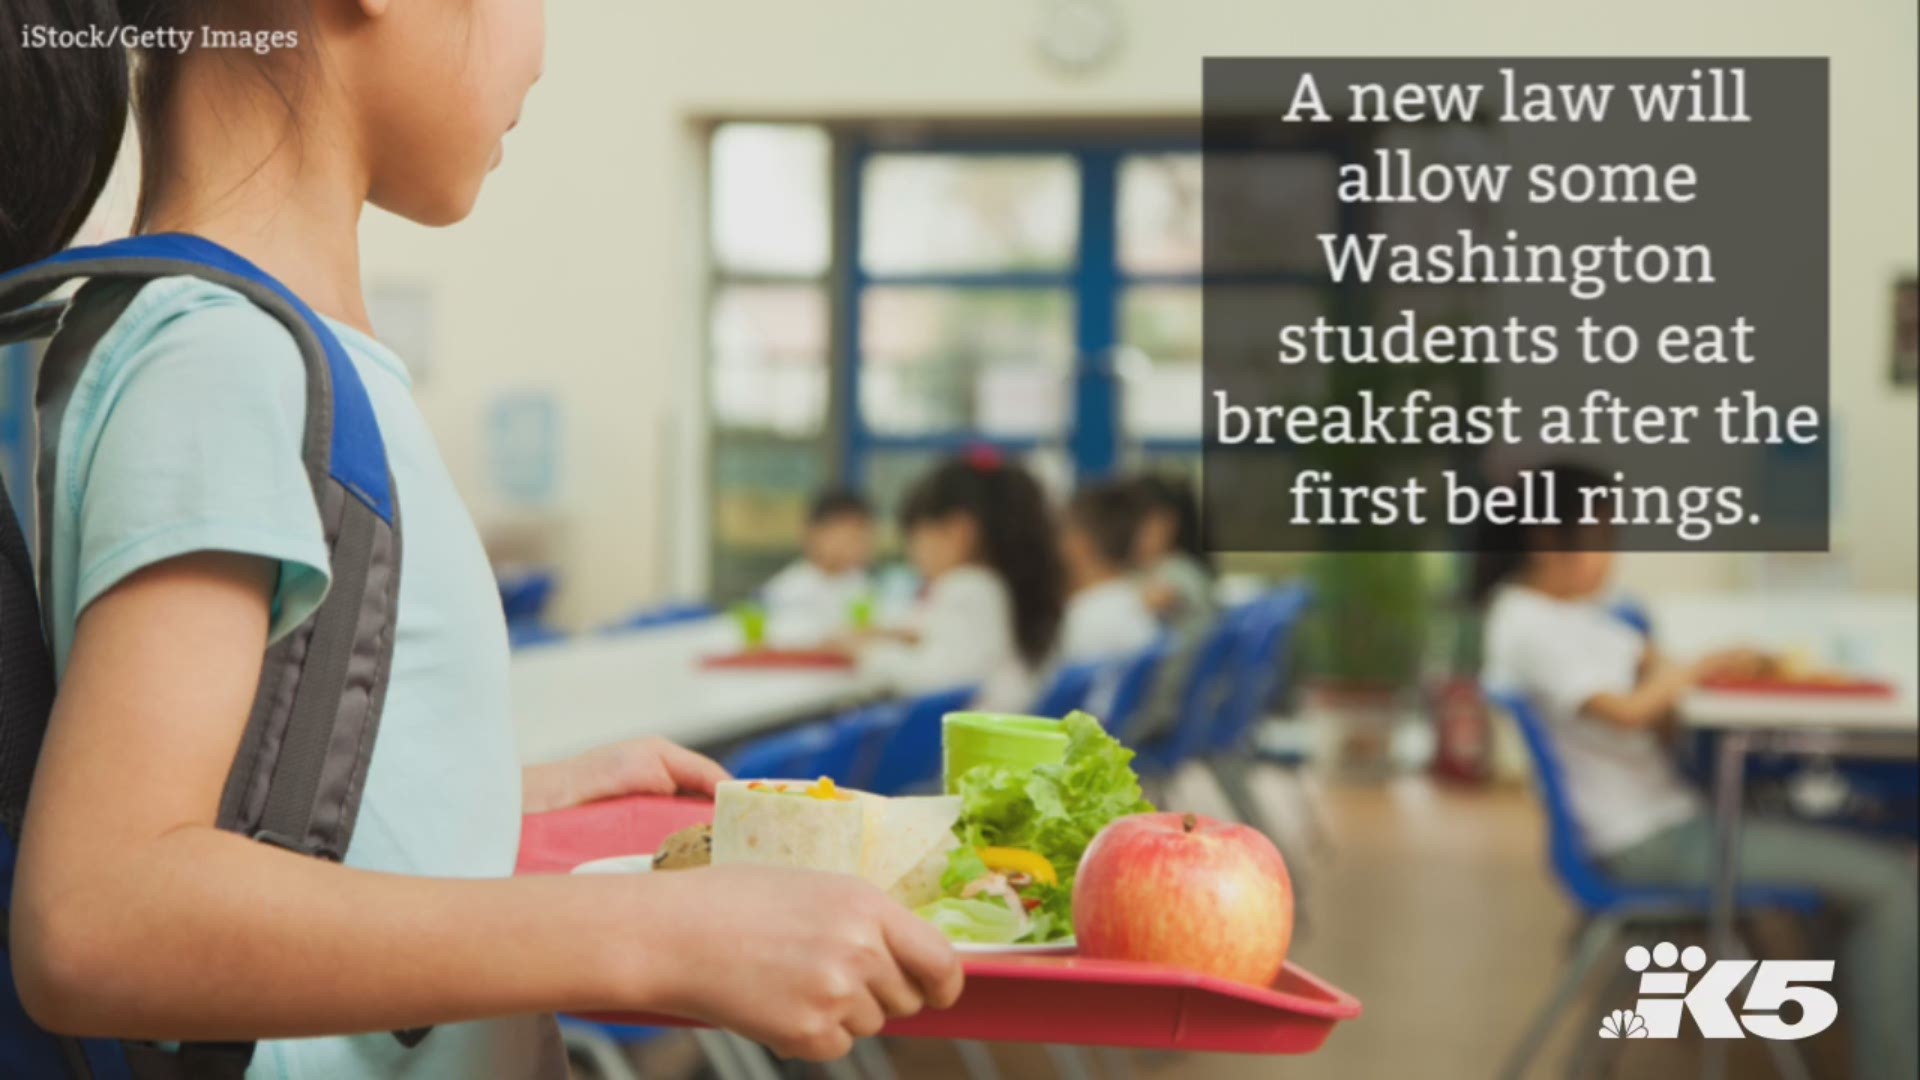 Schools where over 70 percent of students qualify for free or reduced-price lunch will be required to offer some form of the program, such as offering breakfast to students at their desks, providing grab-and-go breakfast carts, or serving breakfast a second time during a passing period or recess later during the day.